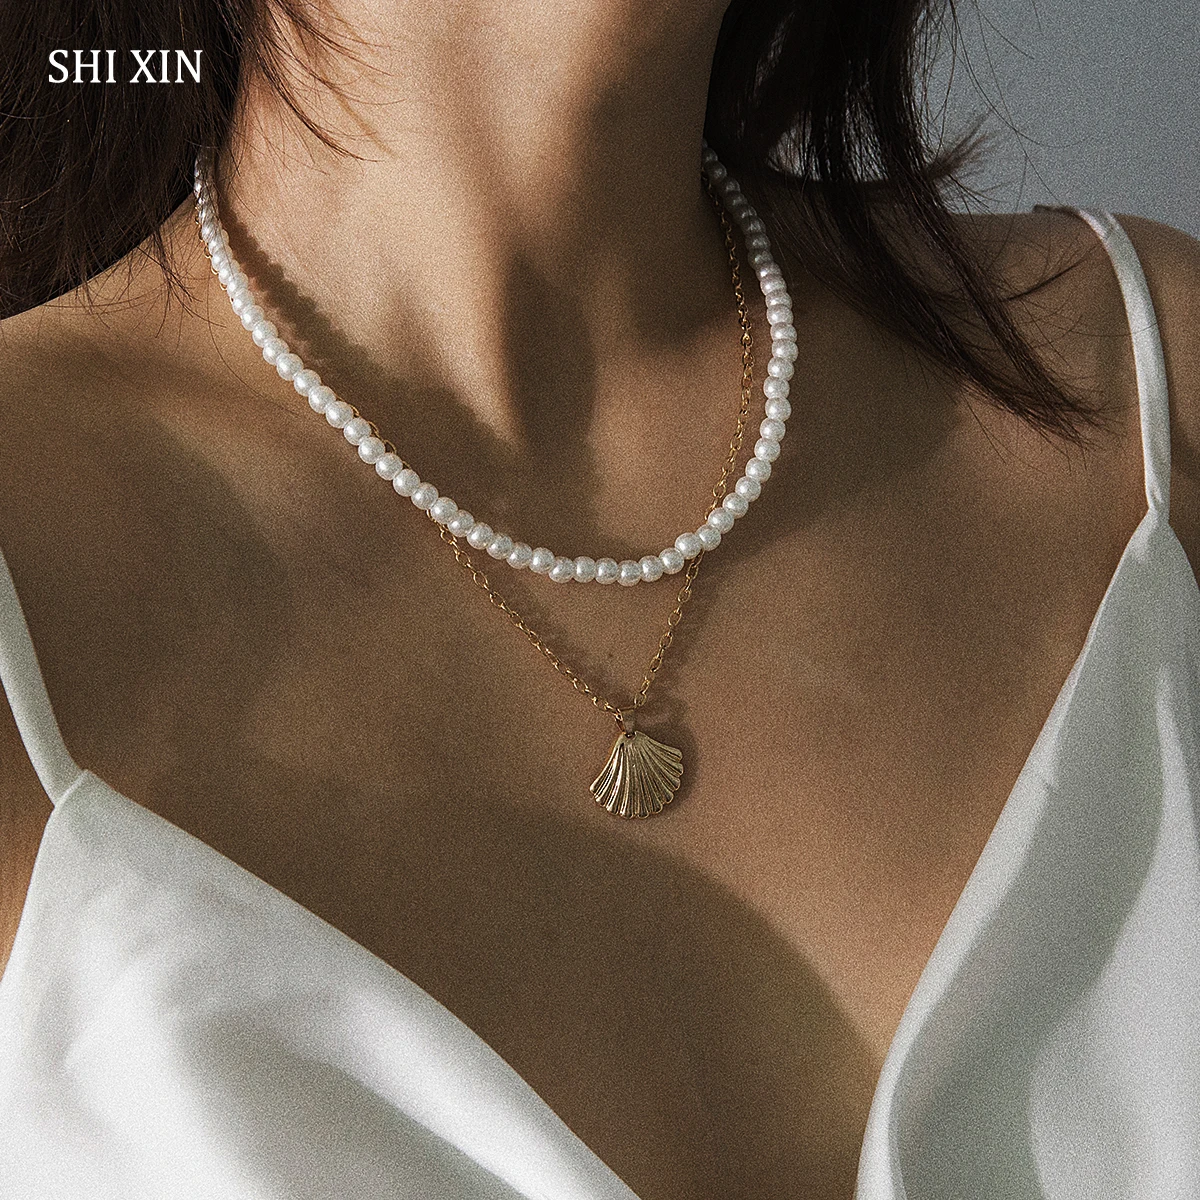 

SHIXIN Layered Pearl Choker Necklace for Women Boho Metal Scallop Shell Pendant Necklace 2019 Fashion Female Jewelry on the Neck